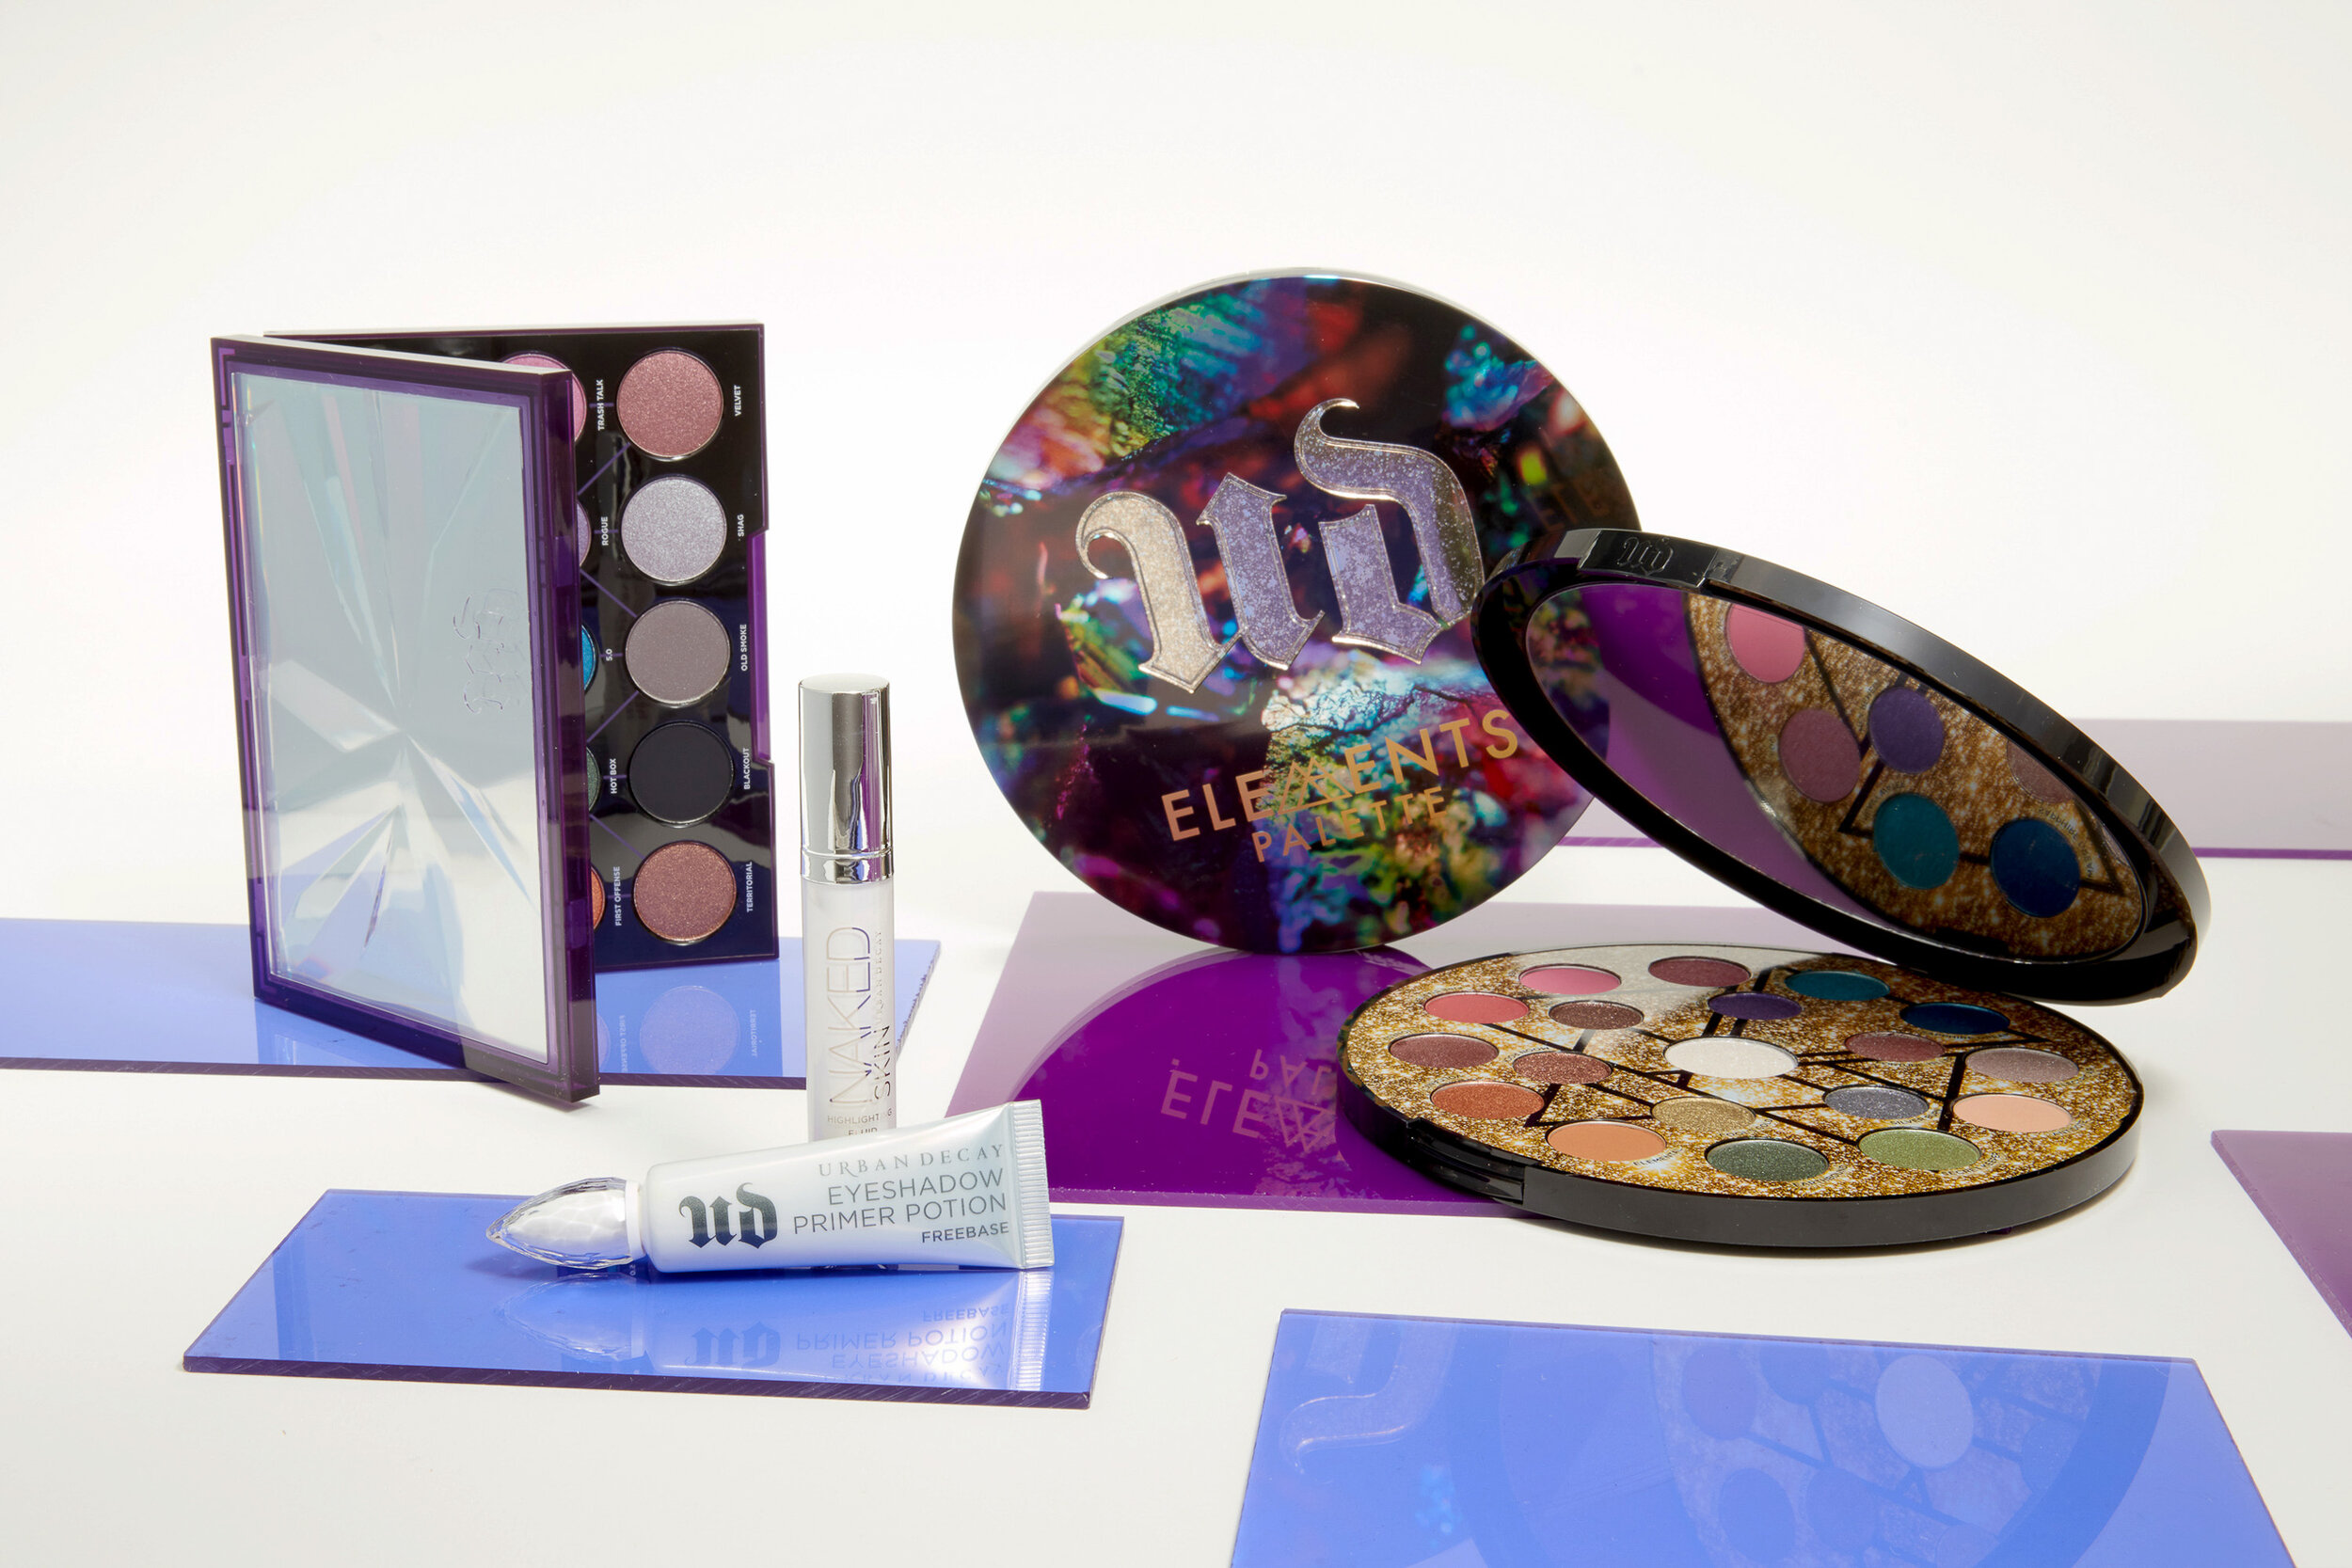 URBAN DECAY UP TO 50% OFF 317052-078.jpg